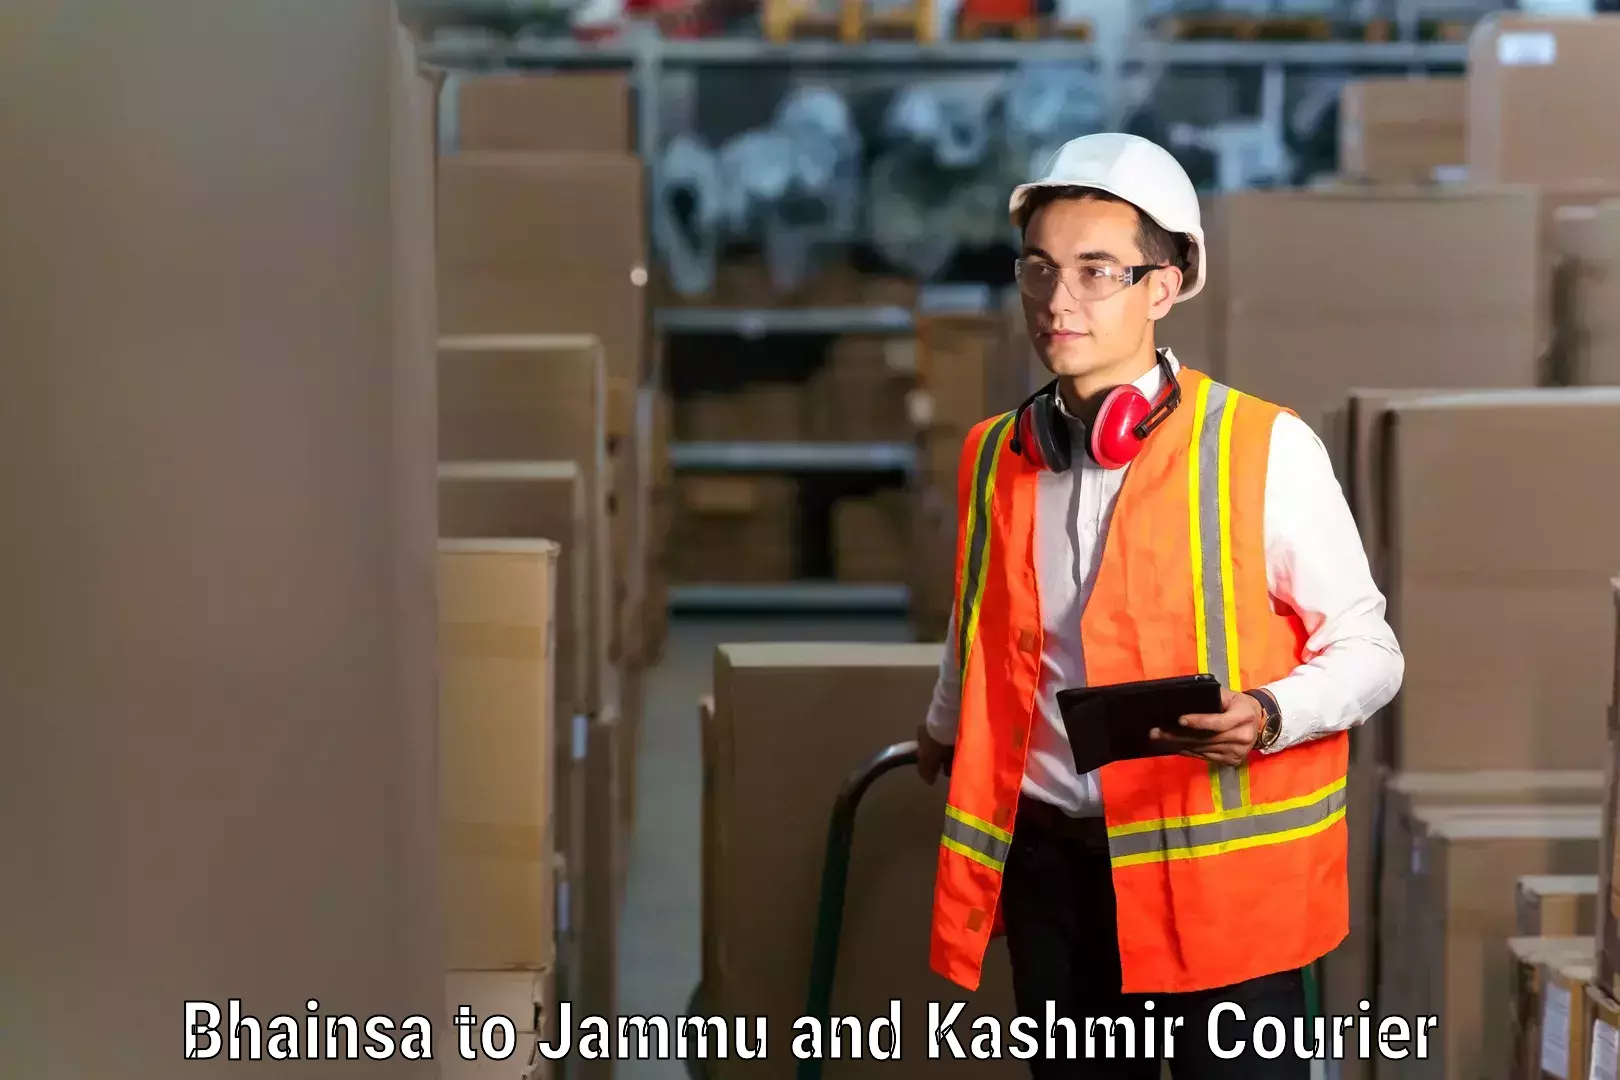 Furniture delivery service Bhainsa to Shopian